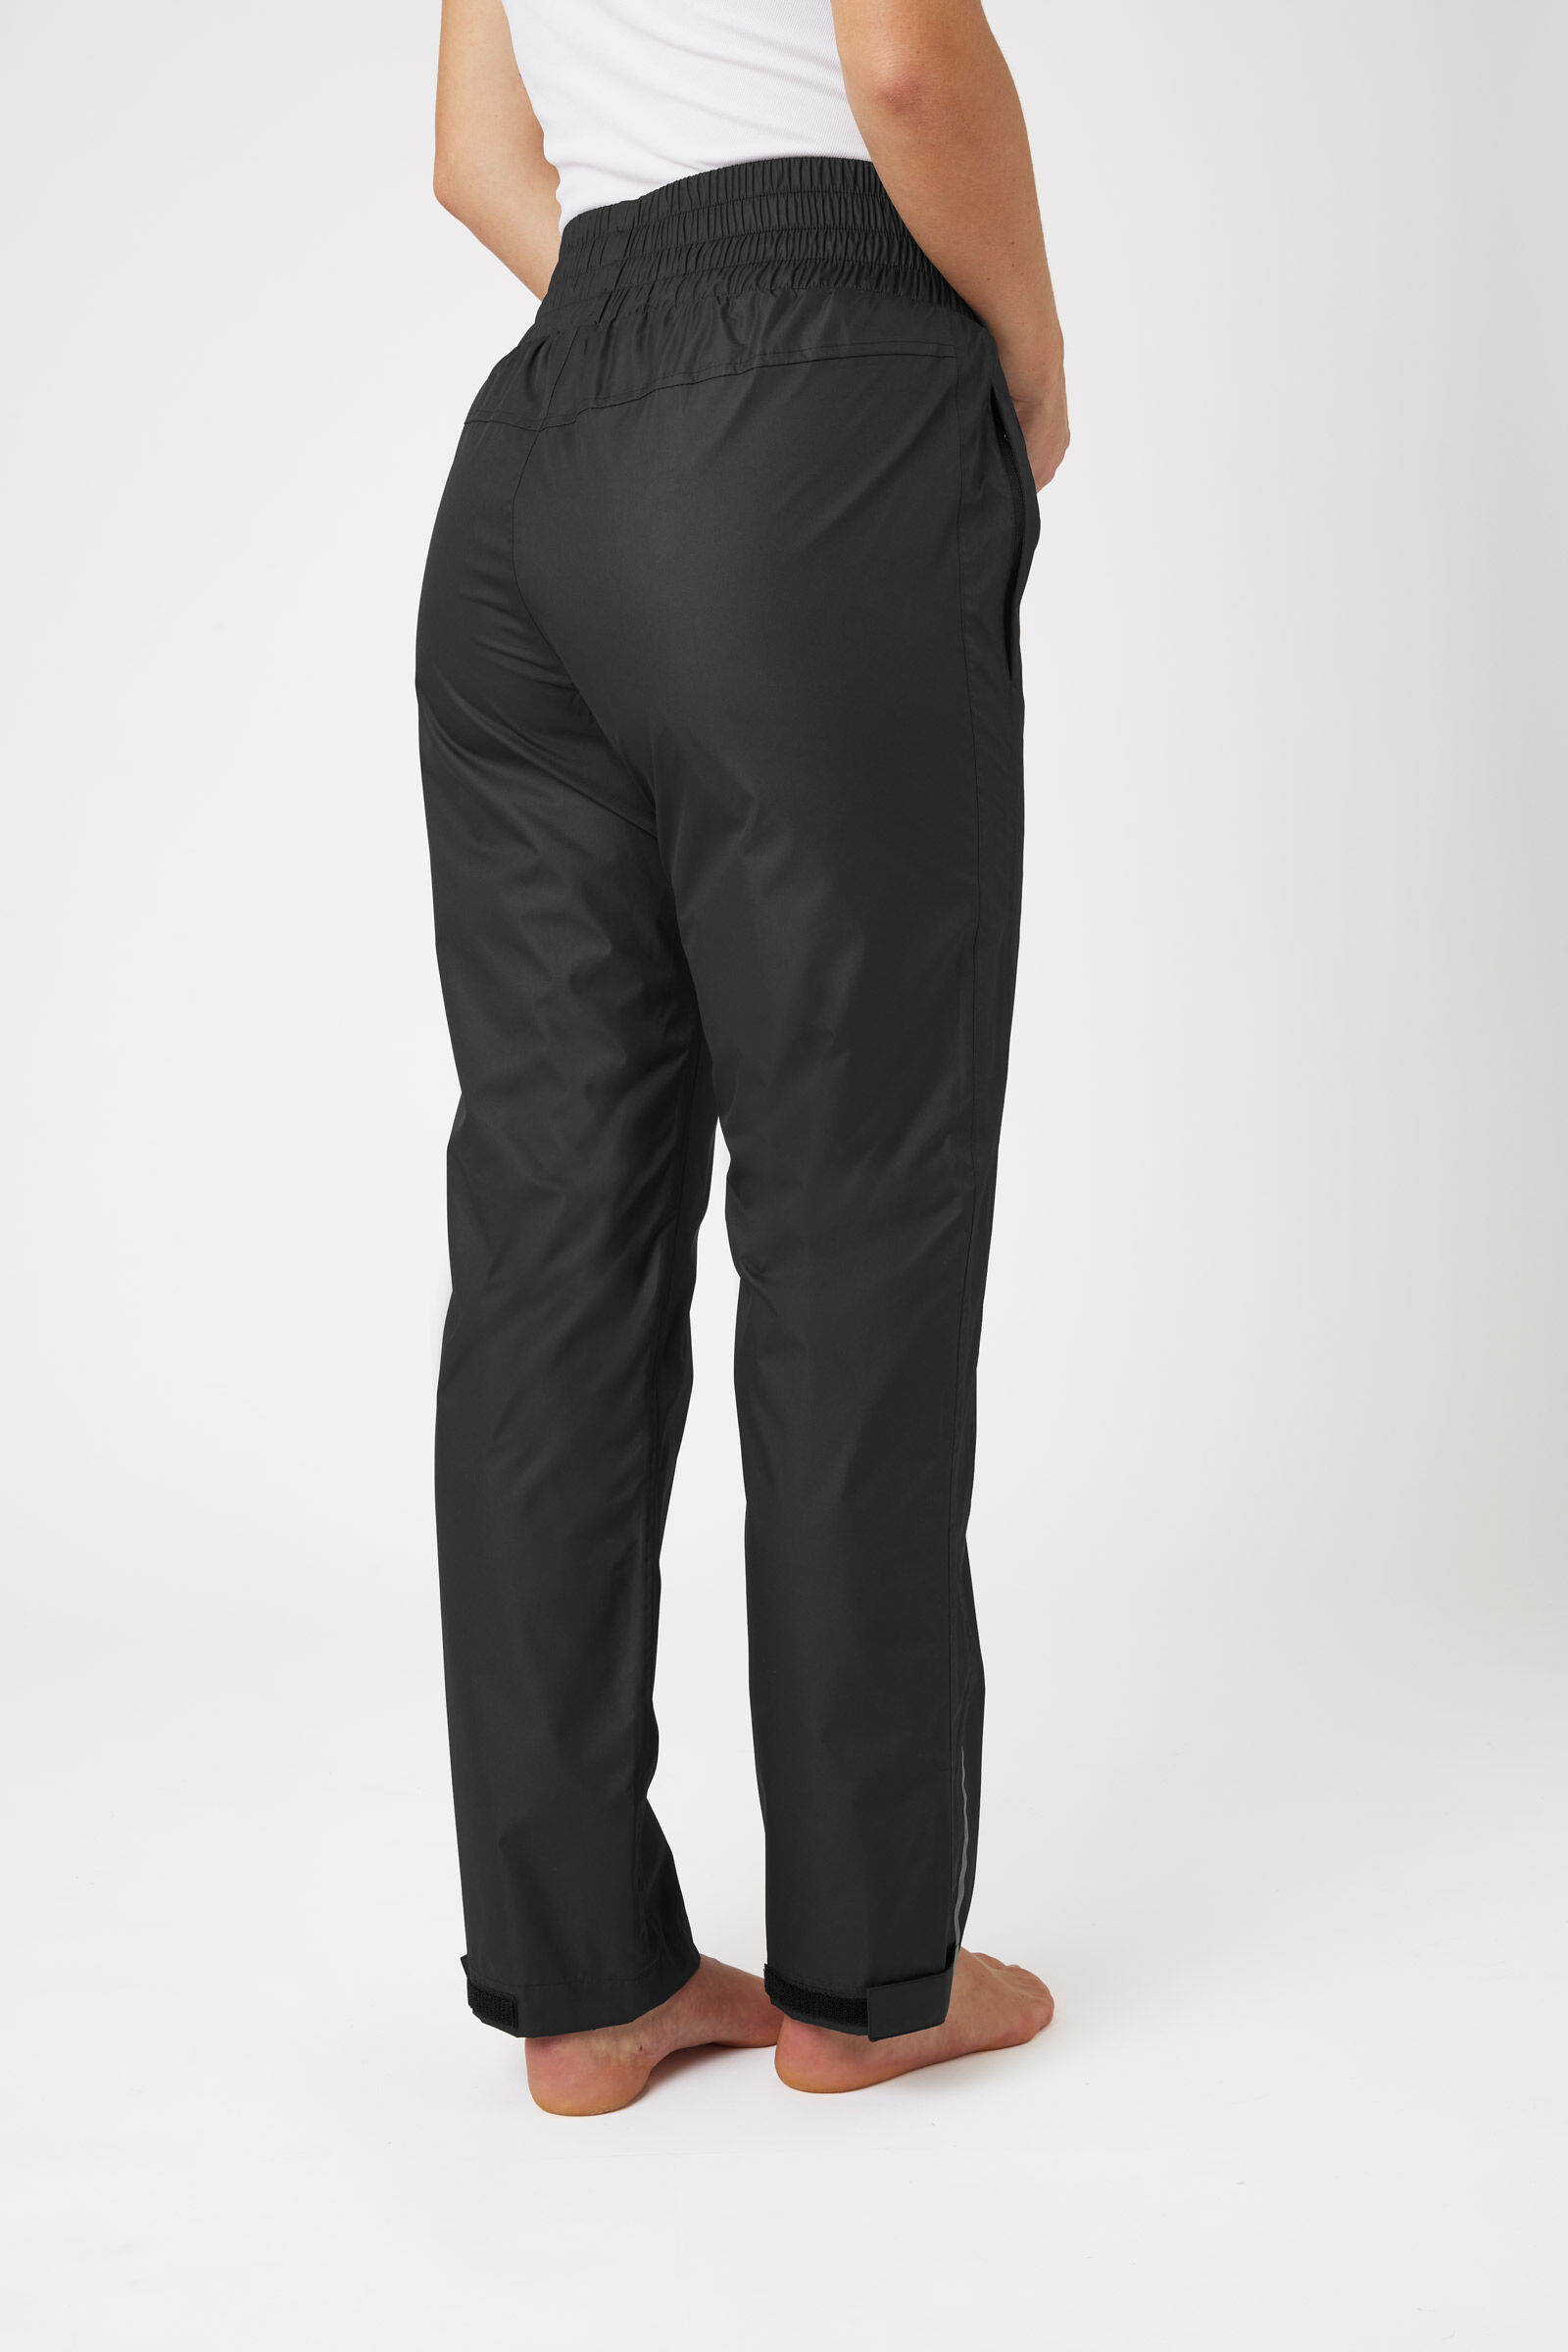 Bootcut Horse Riding Pants with Cargo Pockets | Womens - Ride Proud Clothing